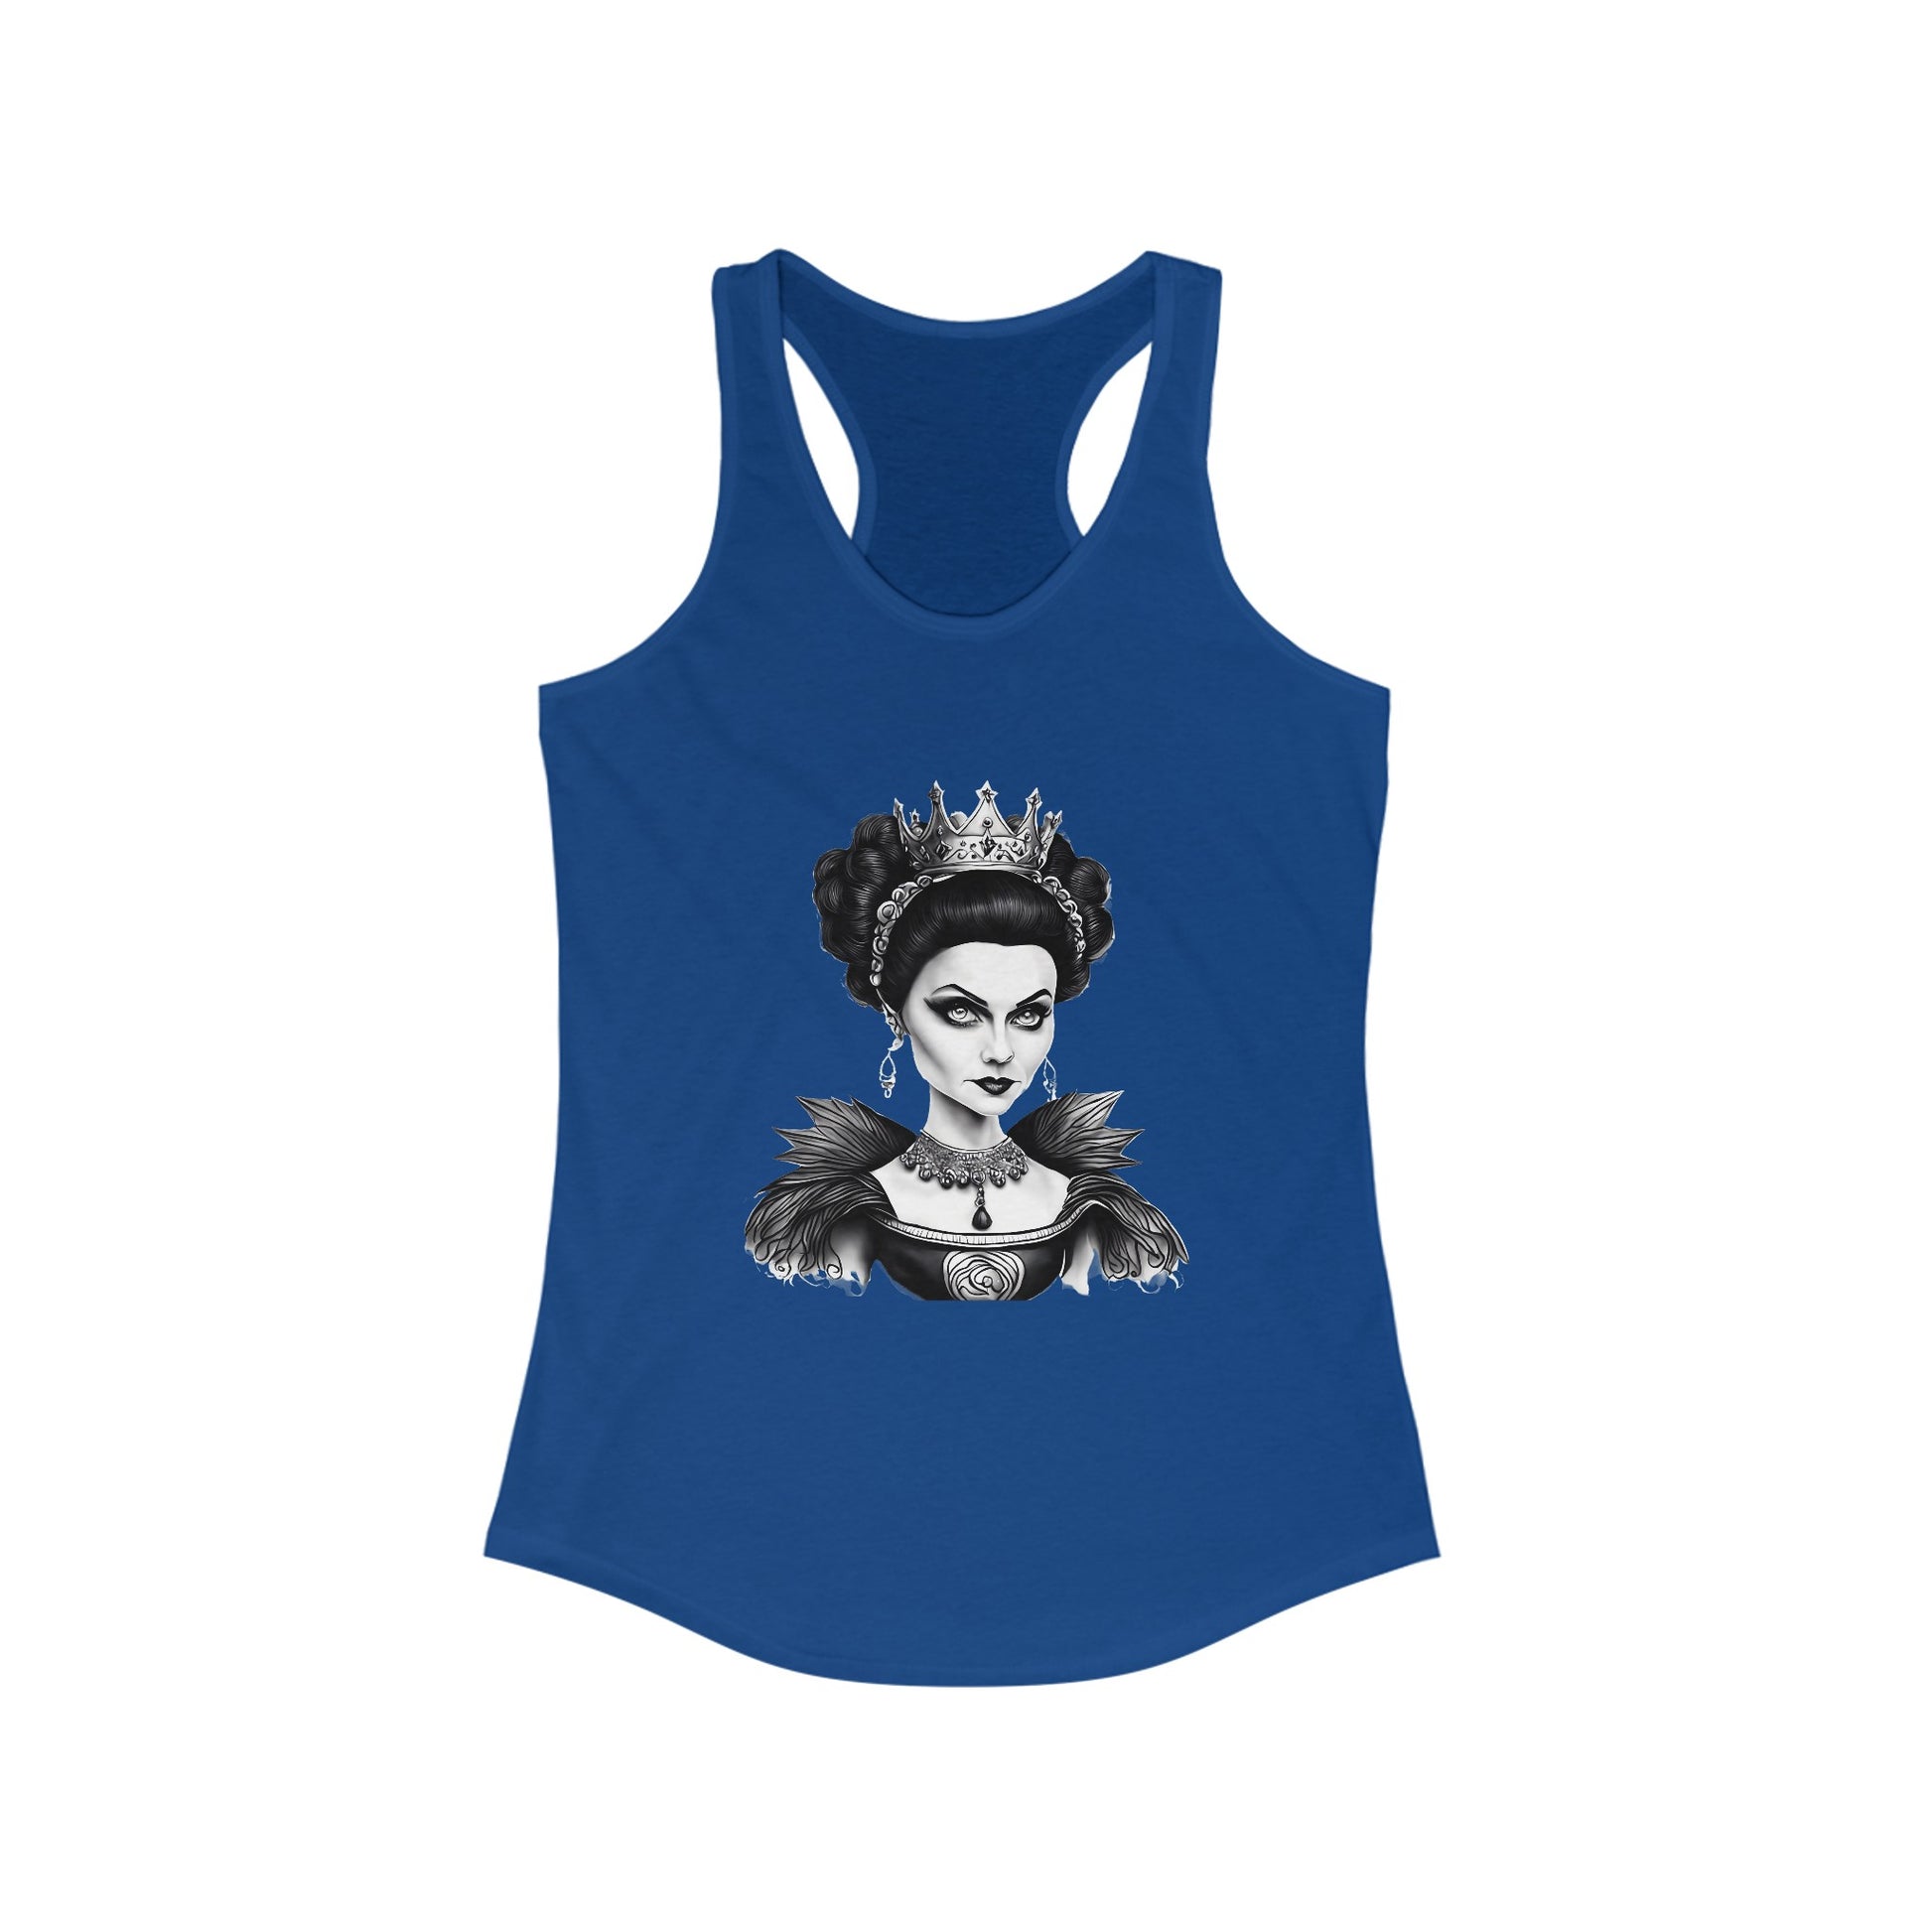 The Stamina for Men Women's Queen of Spades Swingers royal blue Tank Top | QOS front view